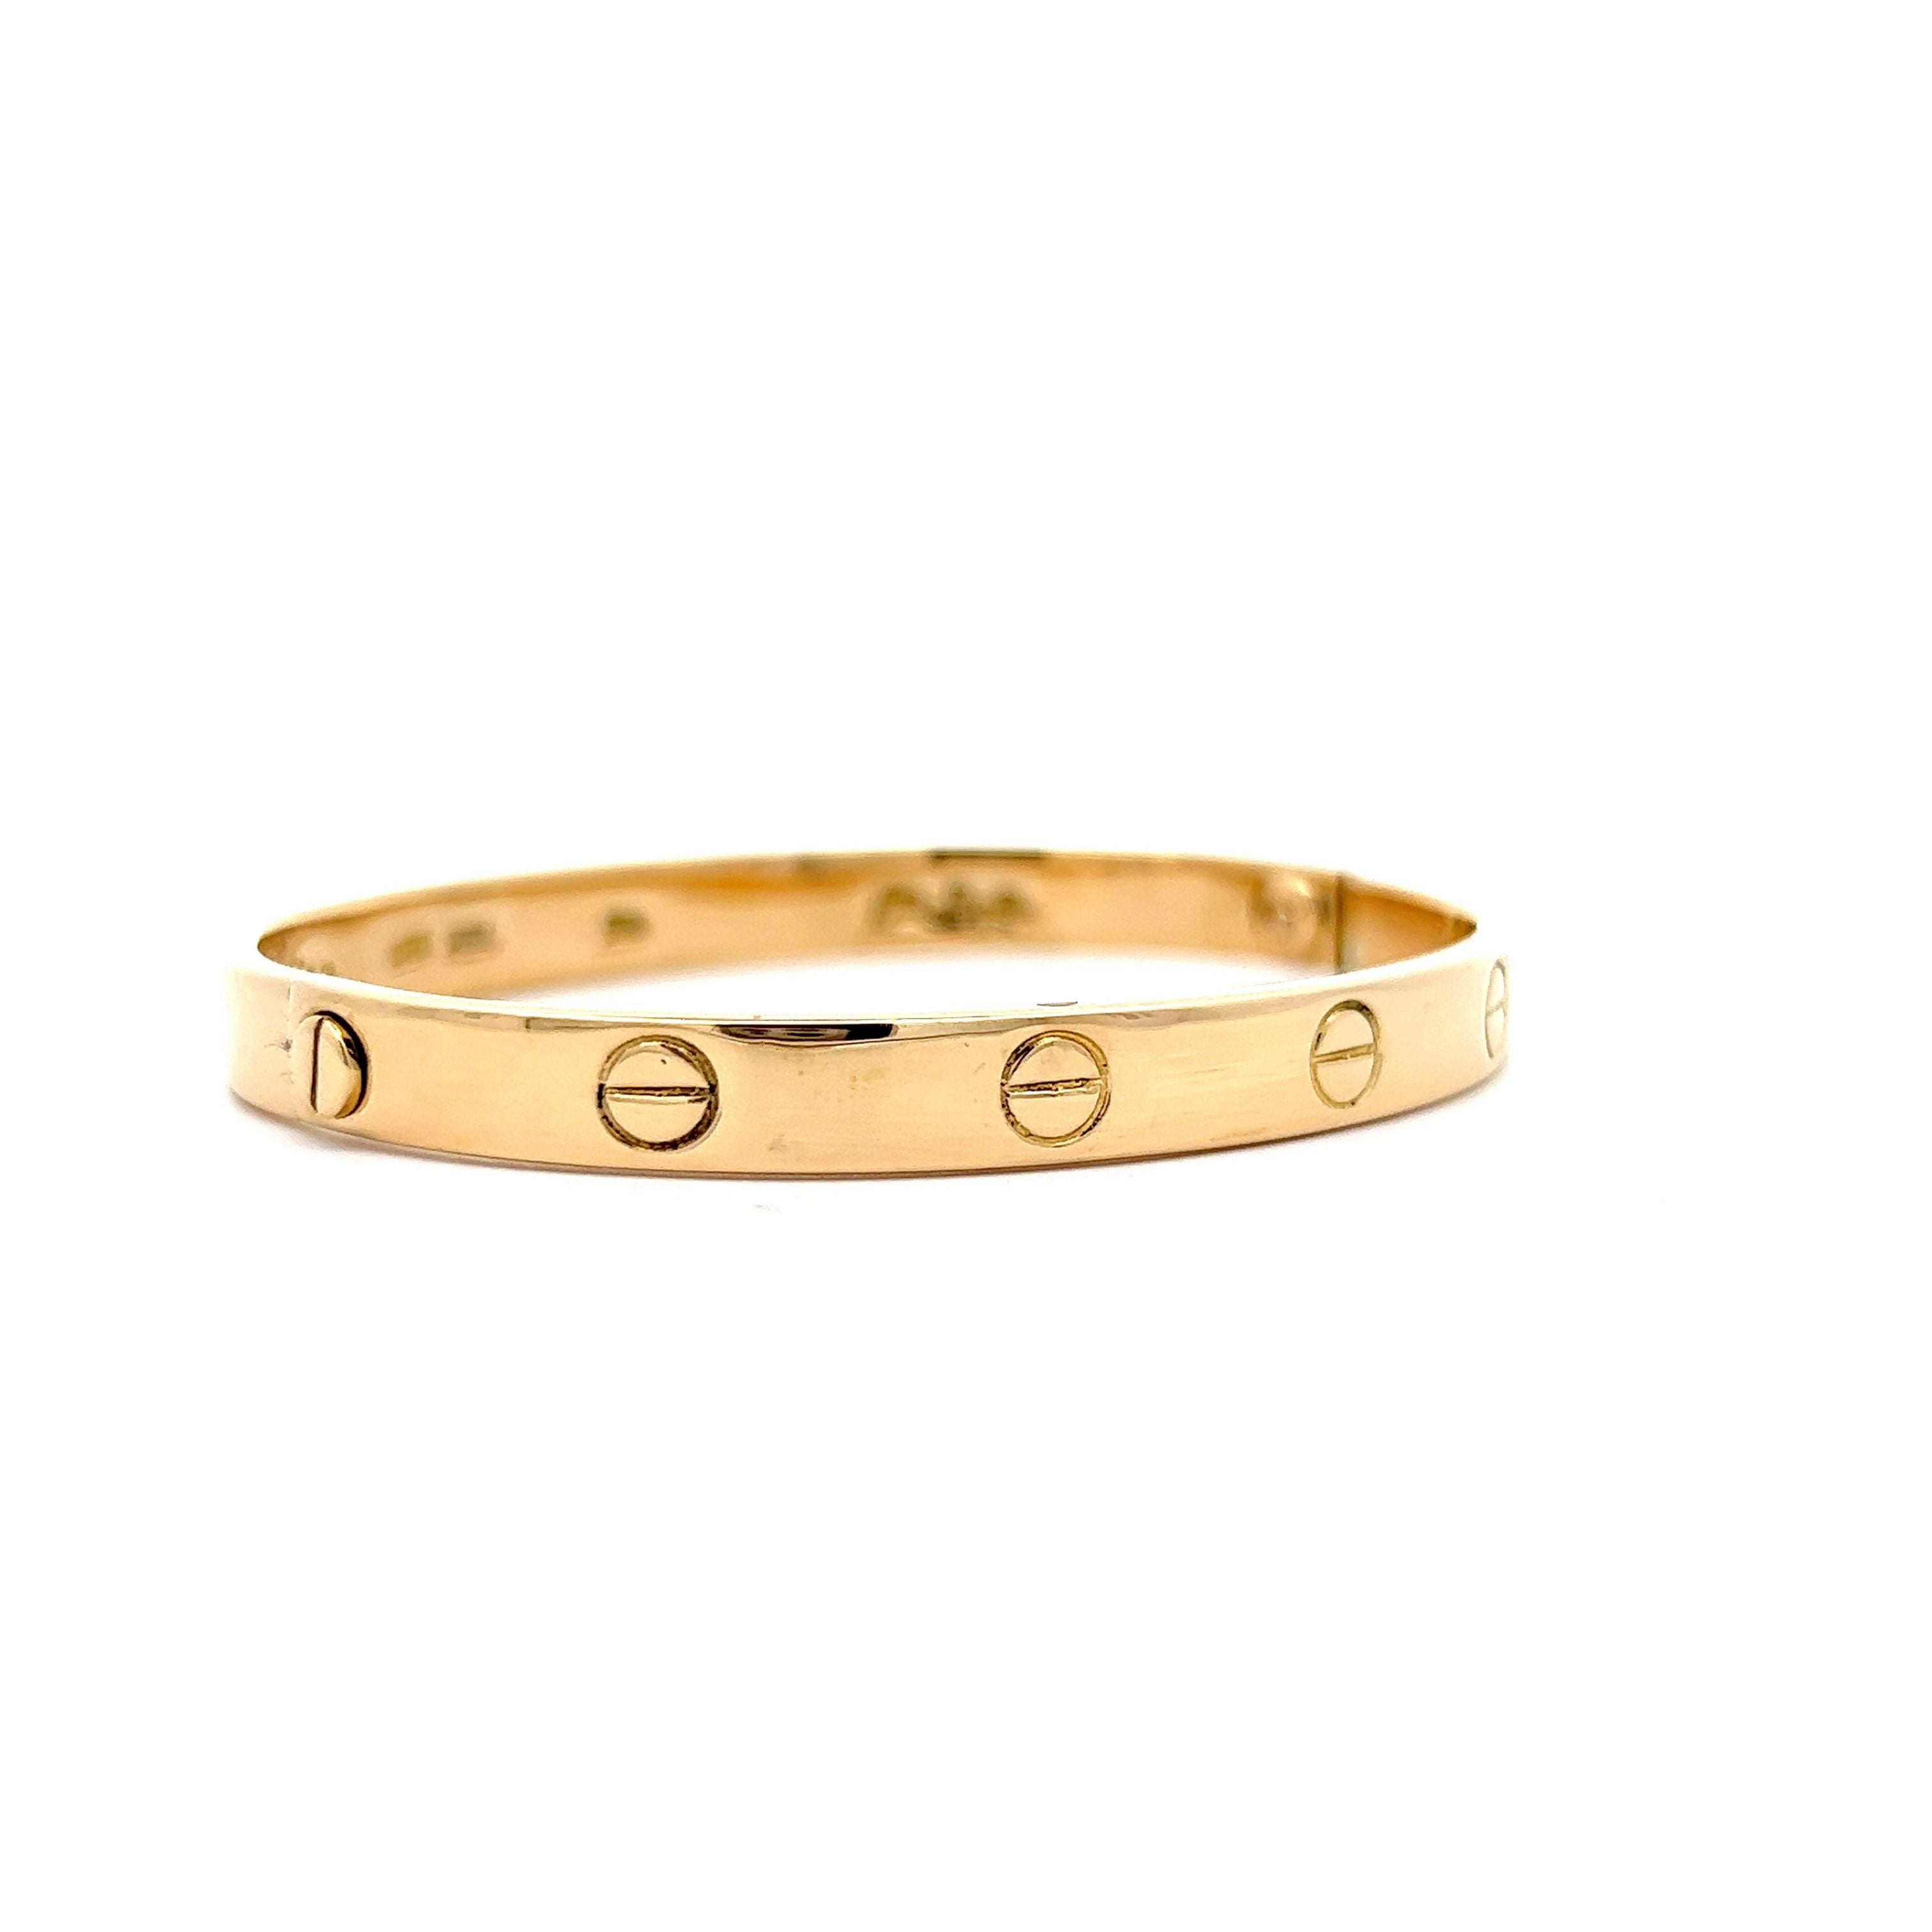 CRB6077017 - Brushed LOVE bracelet - Yellow gold, brushed finish - Cartier